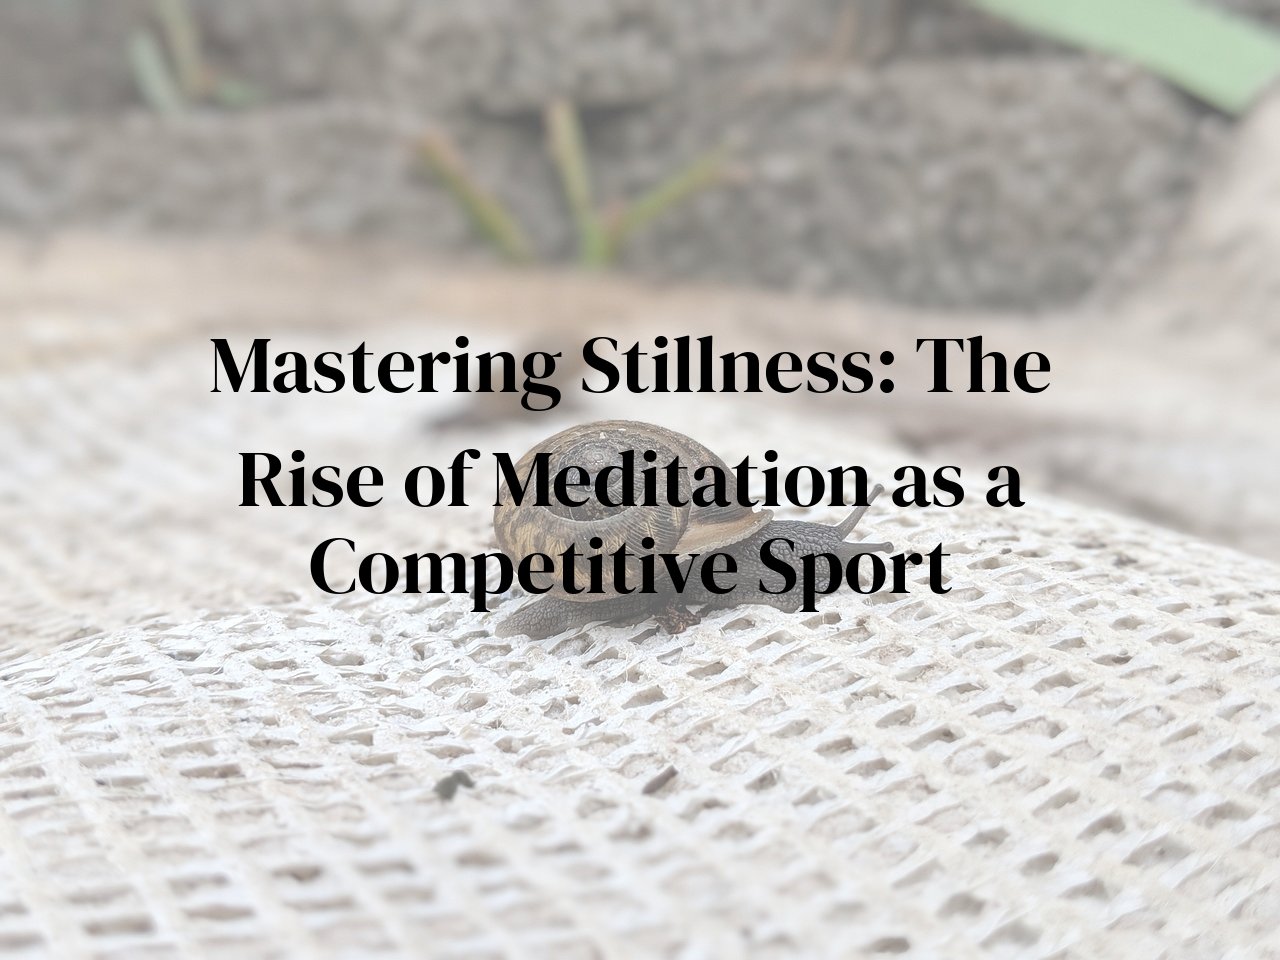 Mastering Stillness: The Rise of Meditation as a Competitive Sport